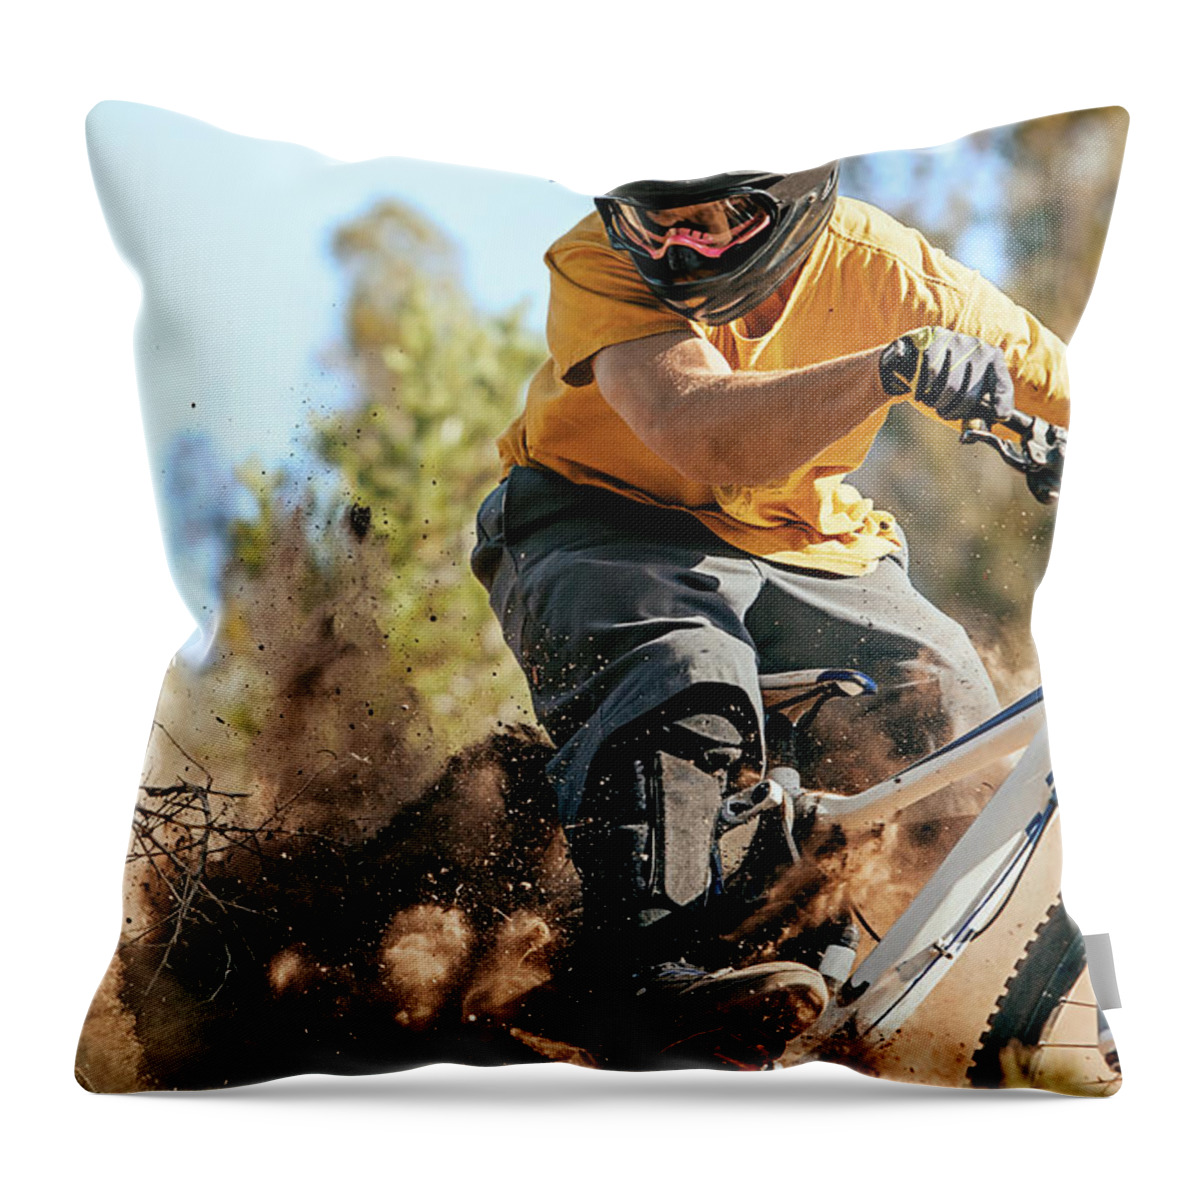 Headwear Throw Pillow featuring the photograph Close Up Of A Mountain Biker Ripping by Daniel Milchev